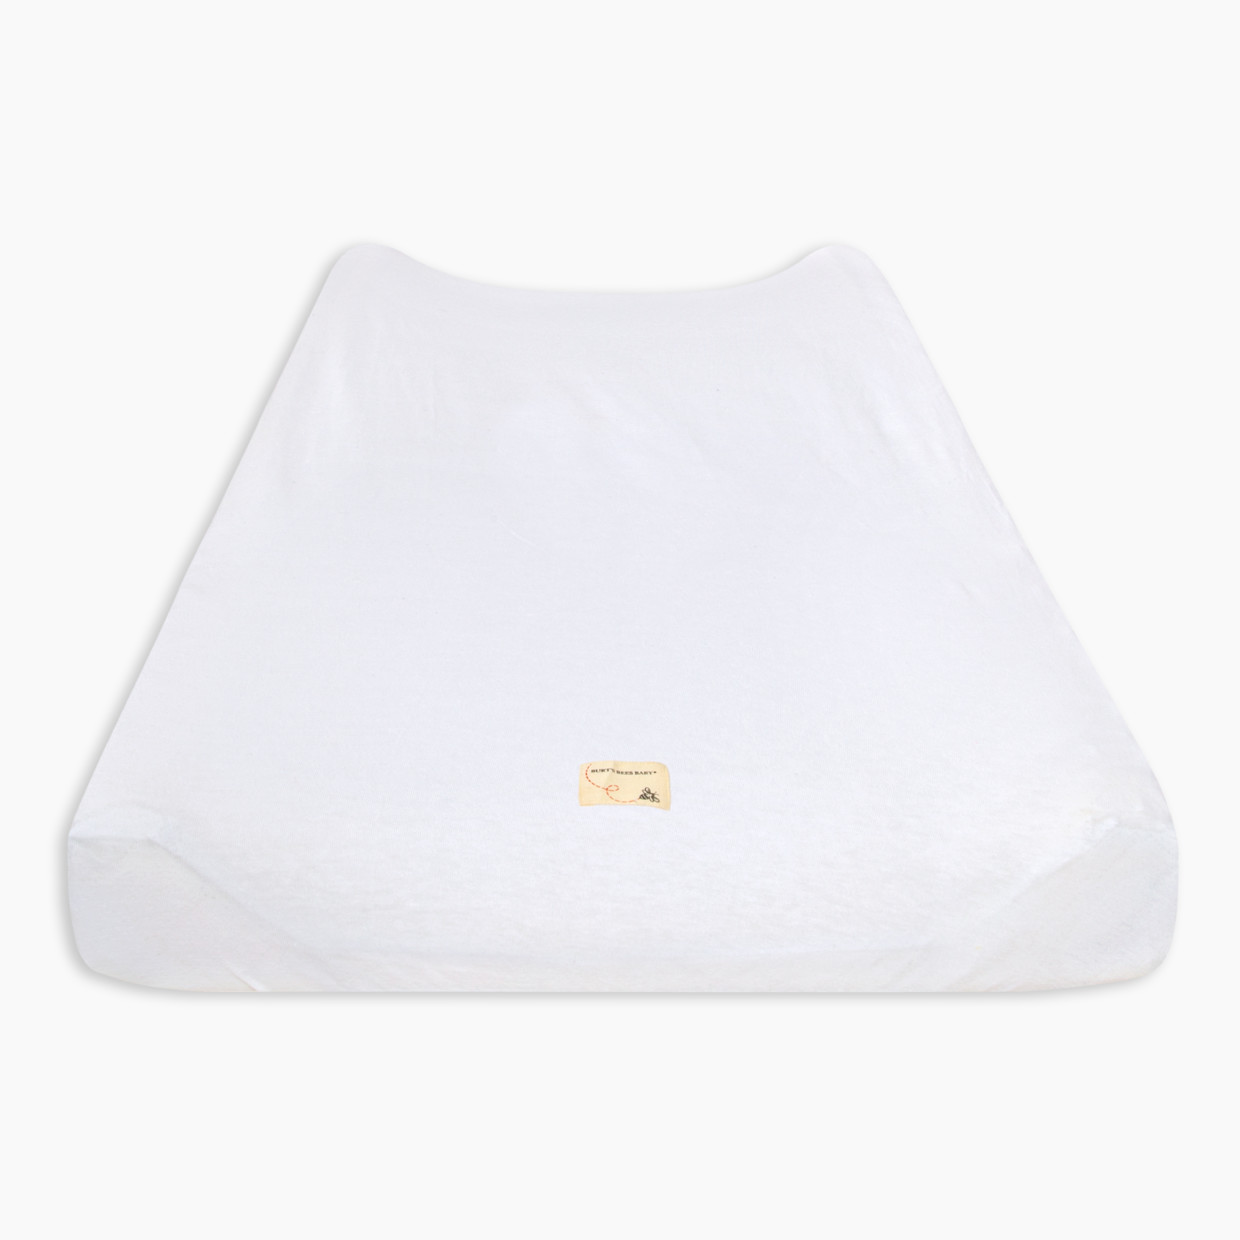 Burt's Bees Baby Organic Cotton Jersey Changing Pad Cover - Cloud.